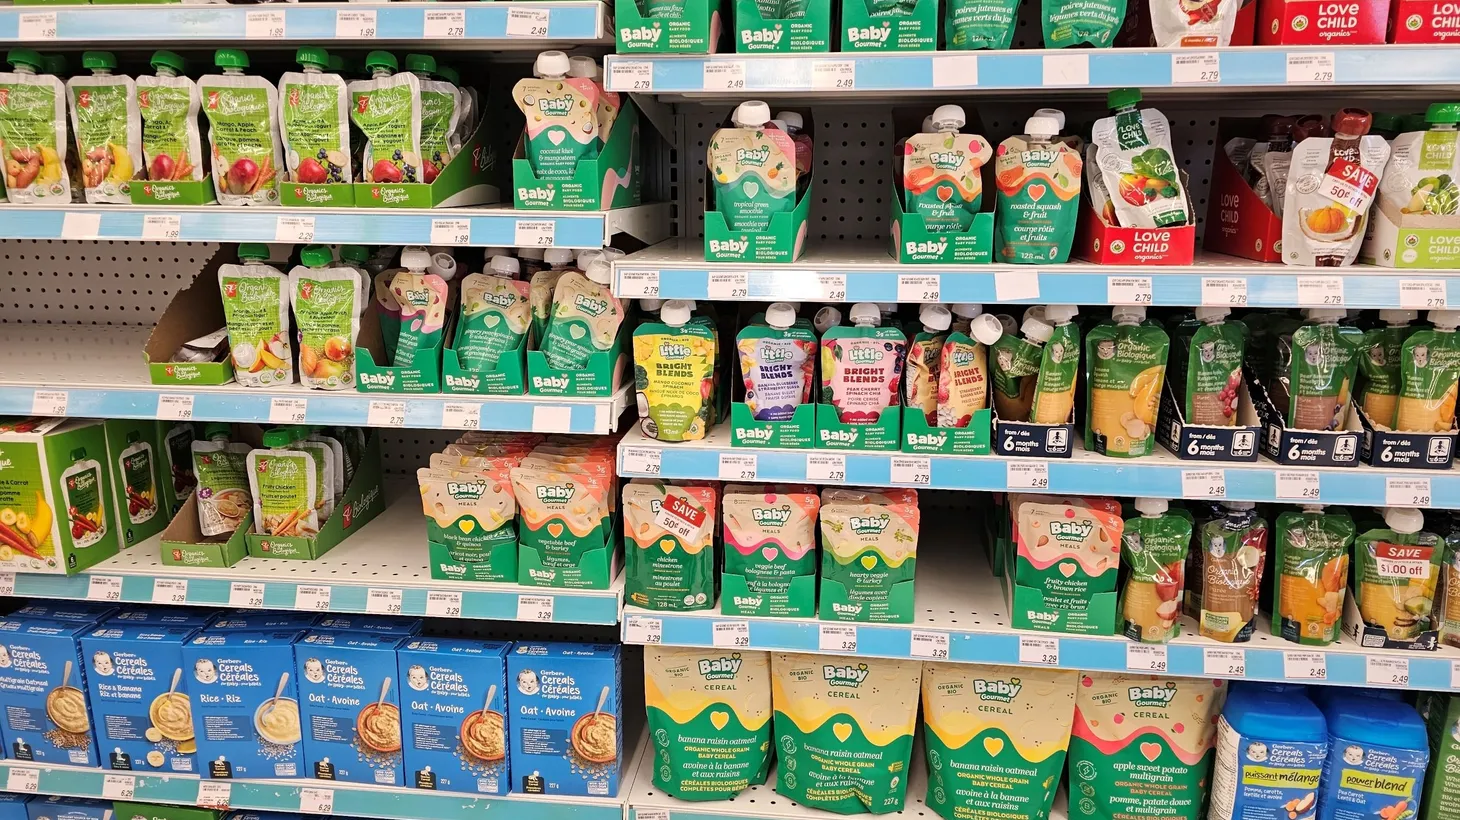 The baby food aisle of the grocery store is stocked with applesauce pouches.